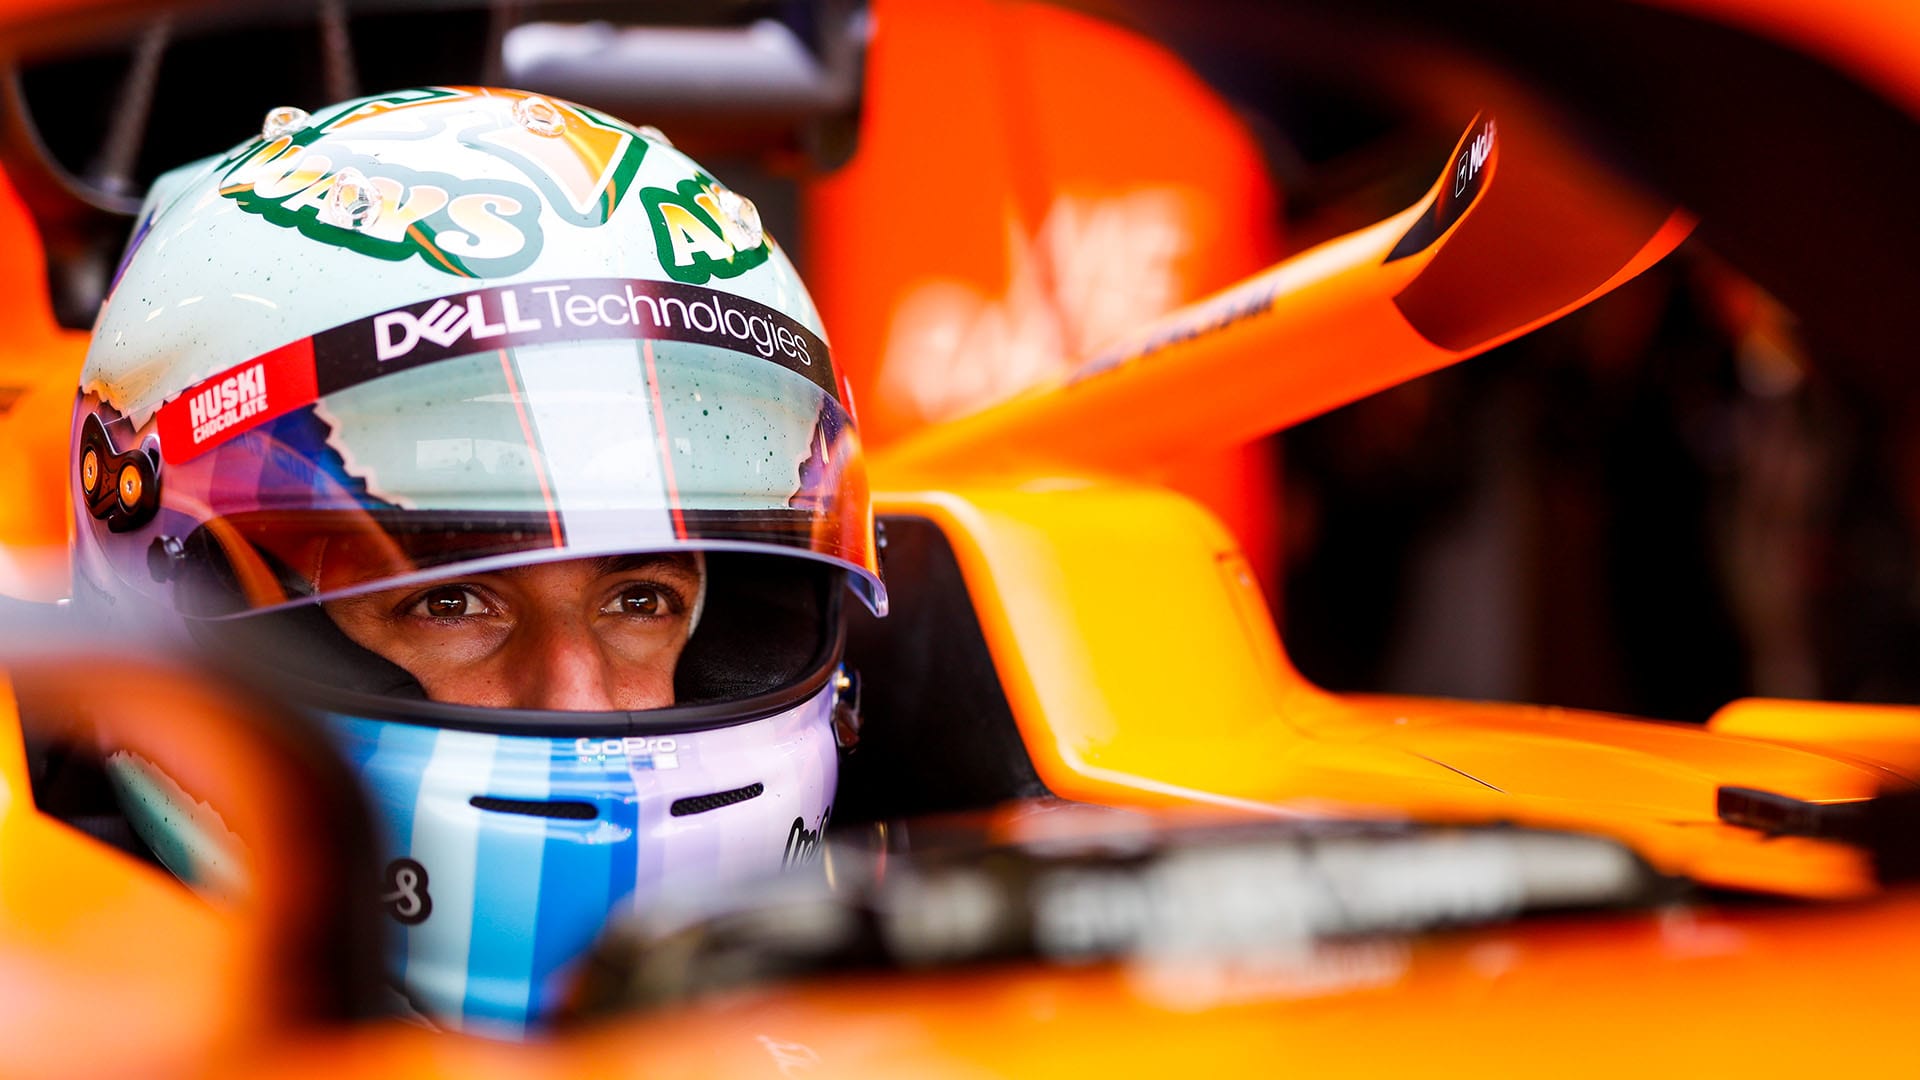 A Lot More Performance To Unlock Says Ricciardo As He Revels In Quick Progress With Mclaren Formula 1